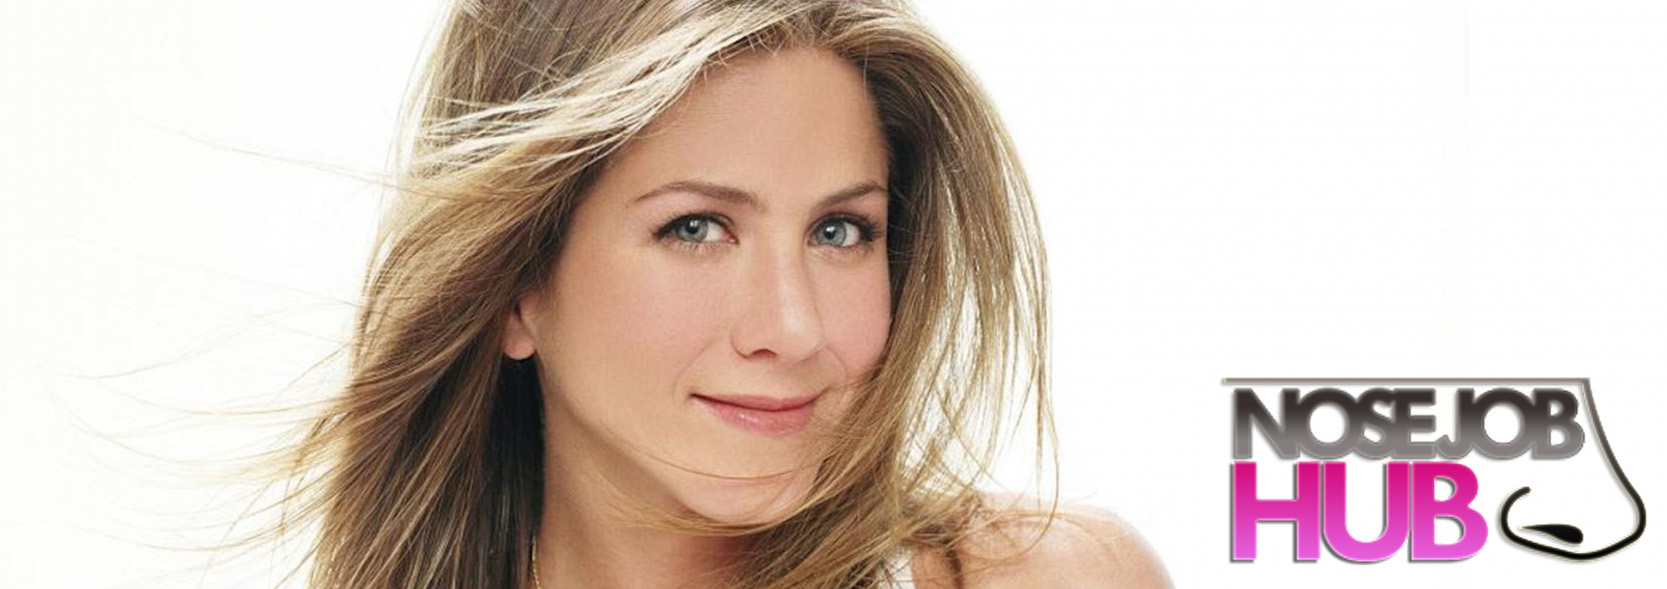 Jennifer Aniston Before and After Nose Job